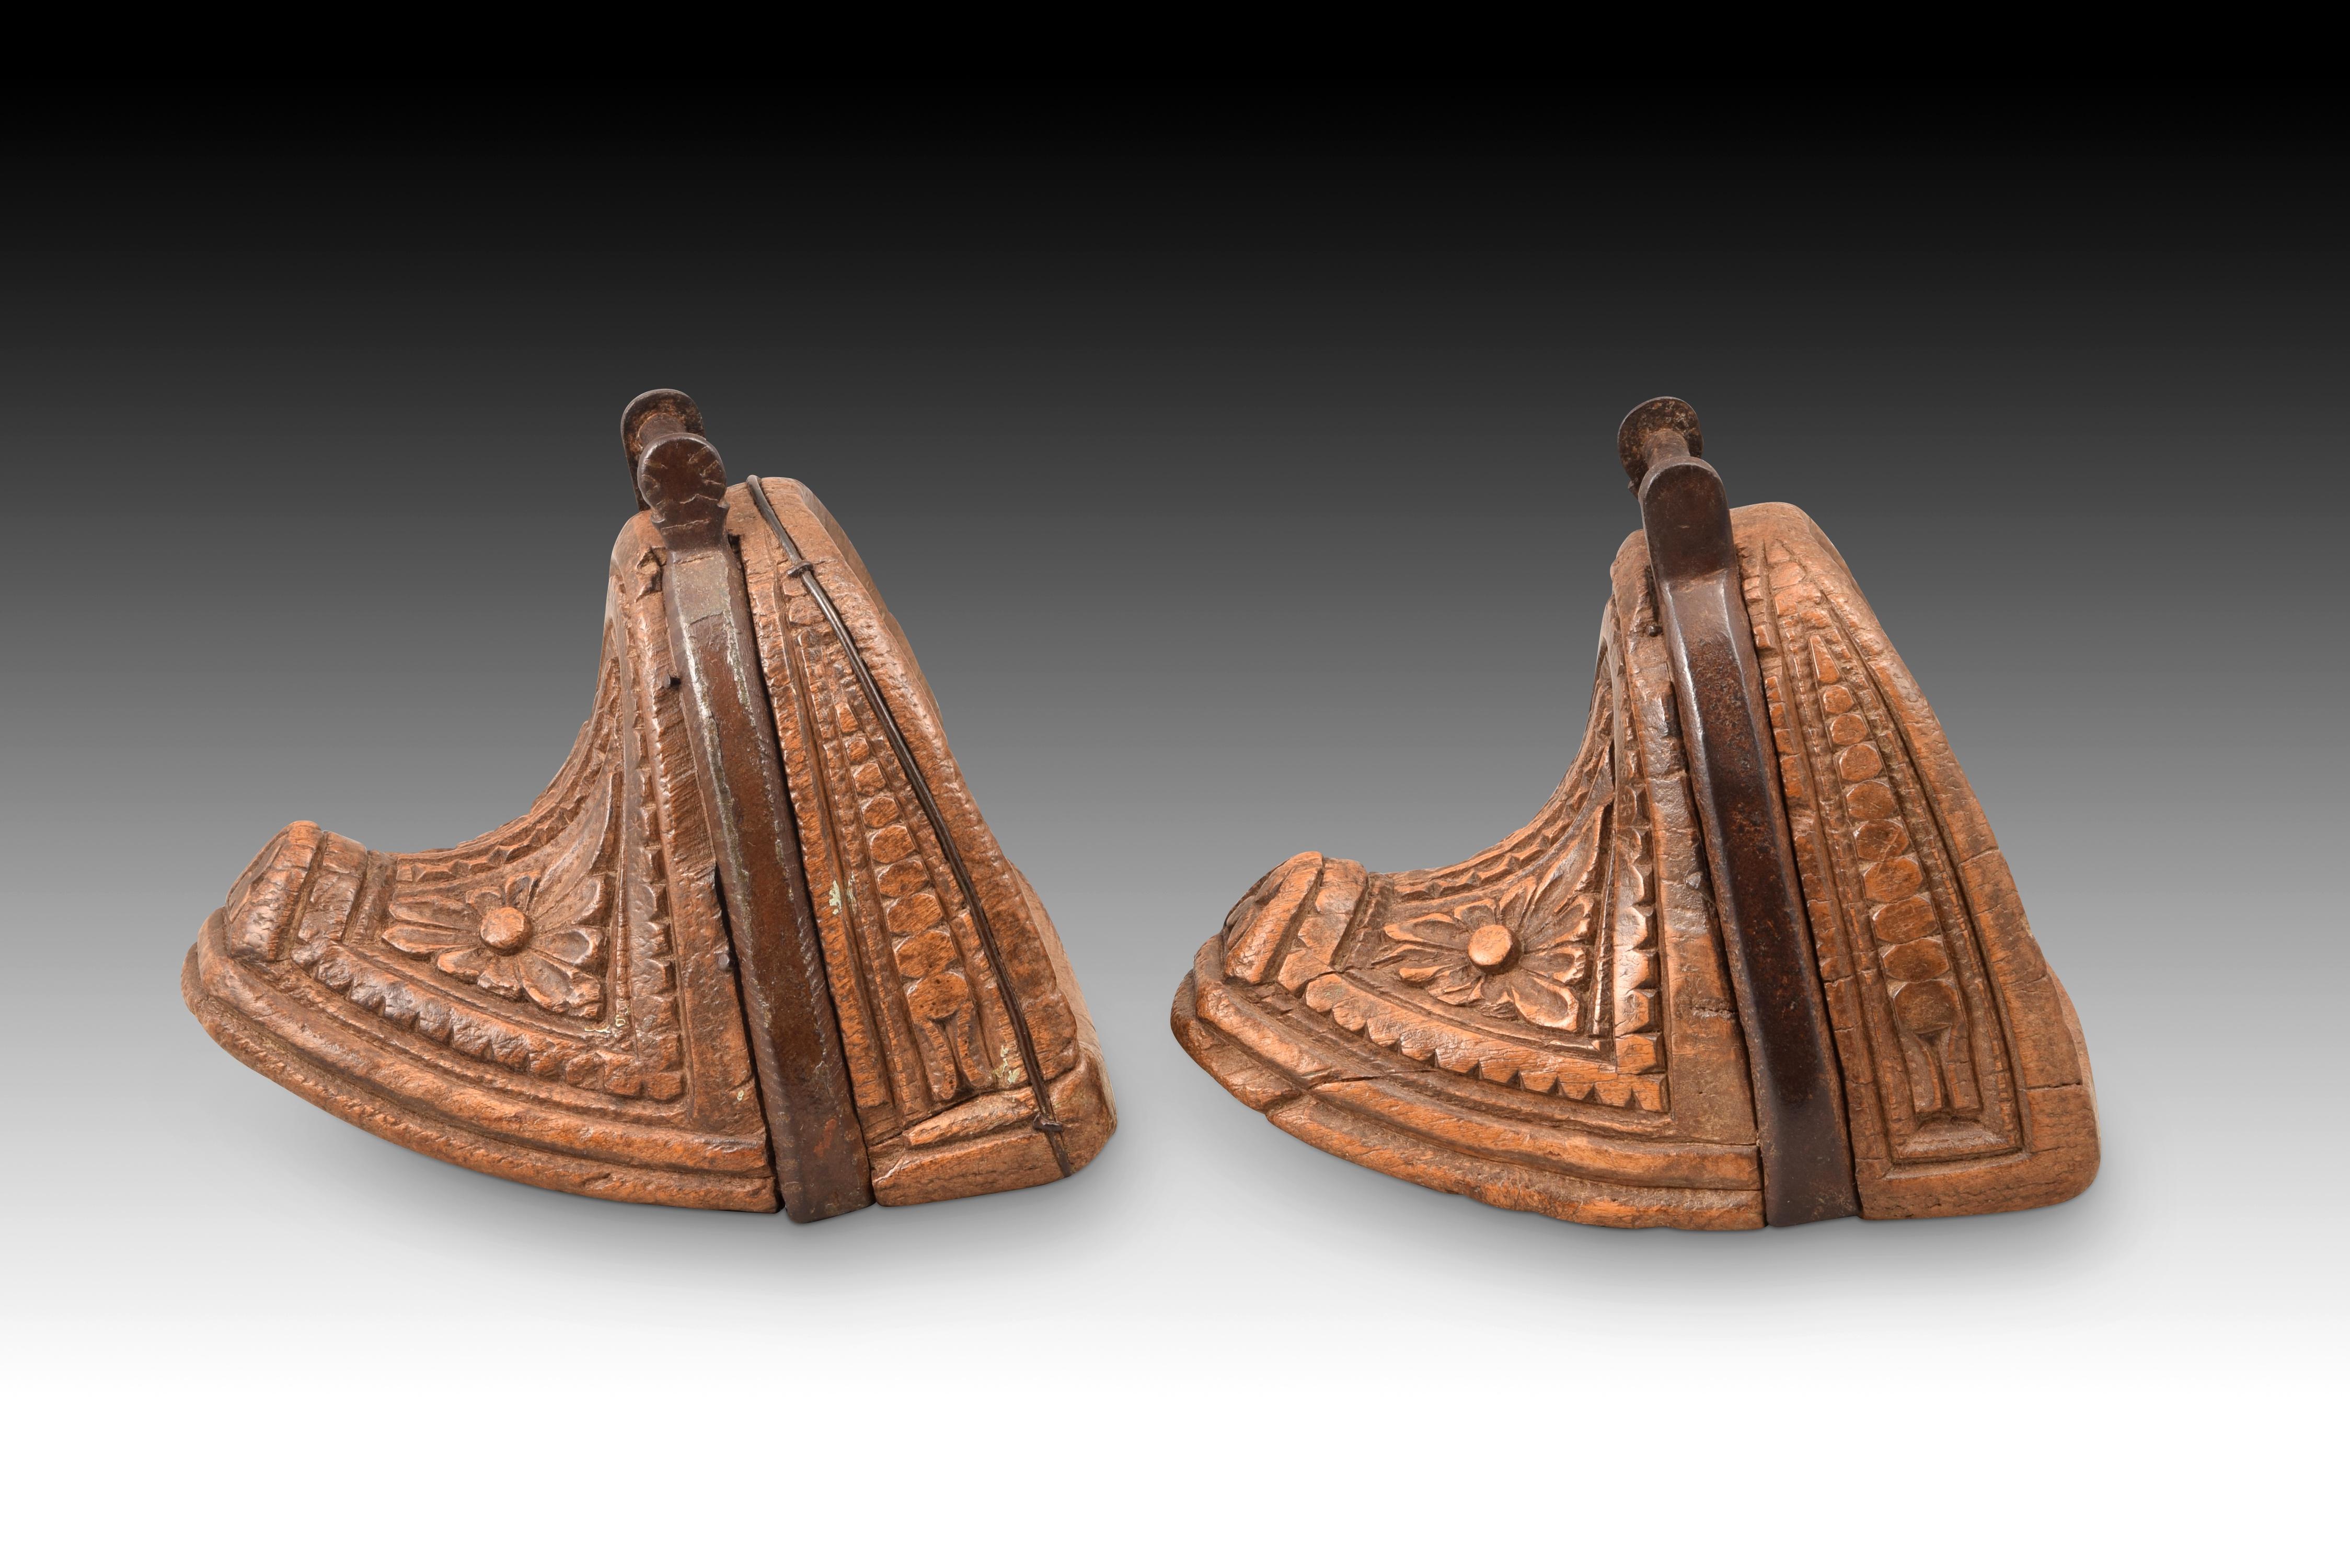 Pair of stirrups. Carved wood, iron. Chile, 18th century. 
Pair of stirrups made up of a carved wooden block, in the shape of a crescent on the front, and decorated on the outside with geometric and vegetal elements, and a surrounding piece of iron.